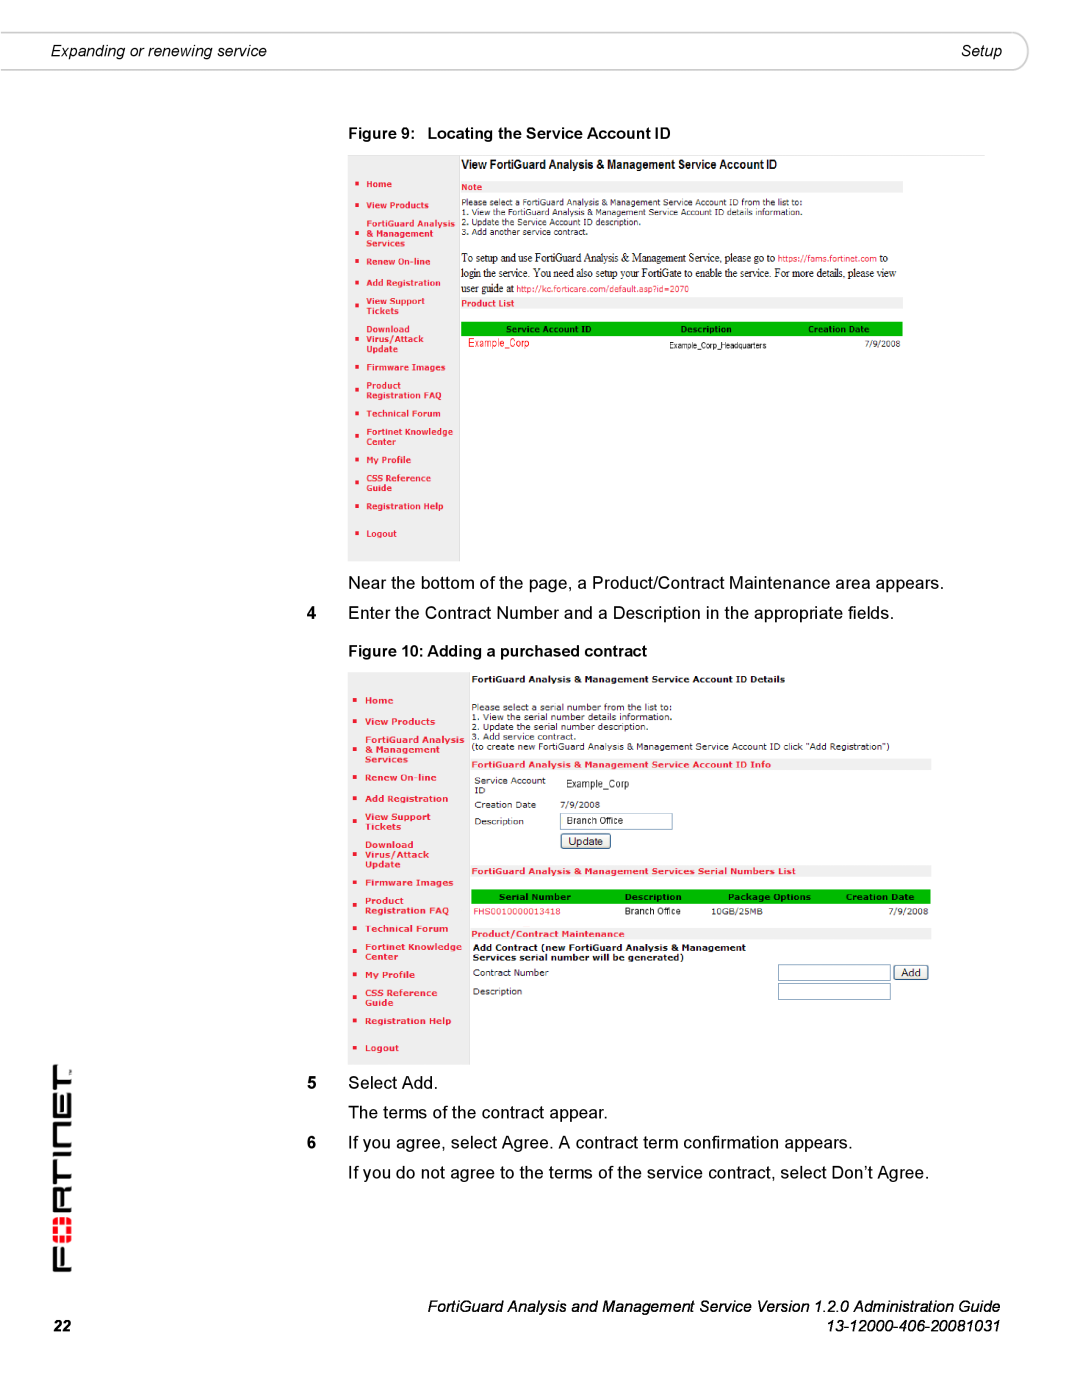 Fortinet 1.2.0 manual Locating the Service Account ID, Adding a purchased contract 